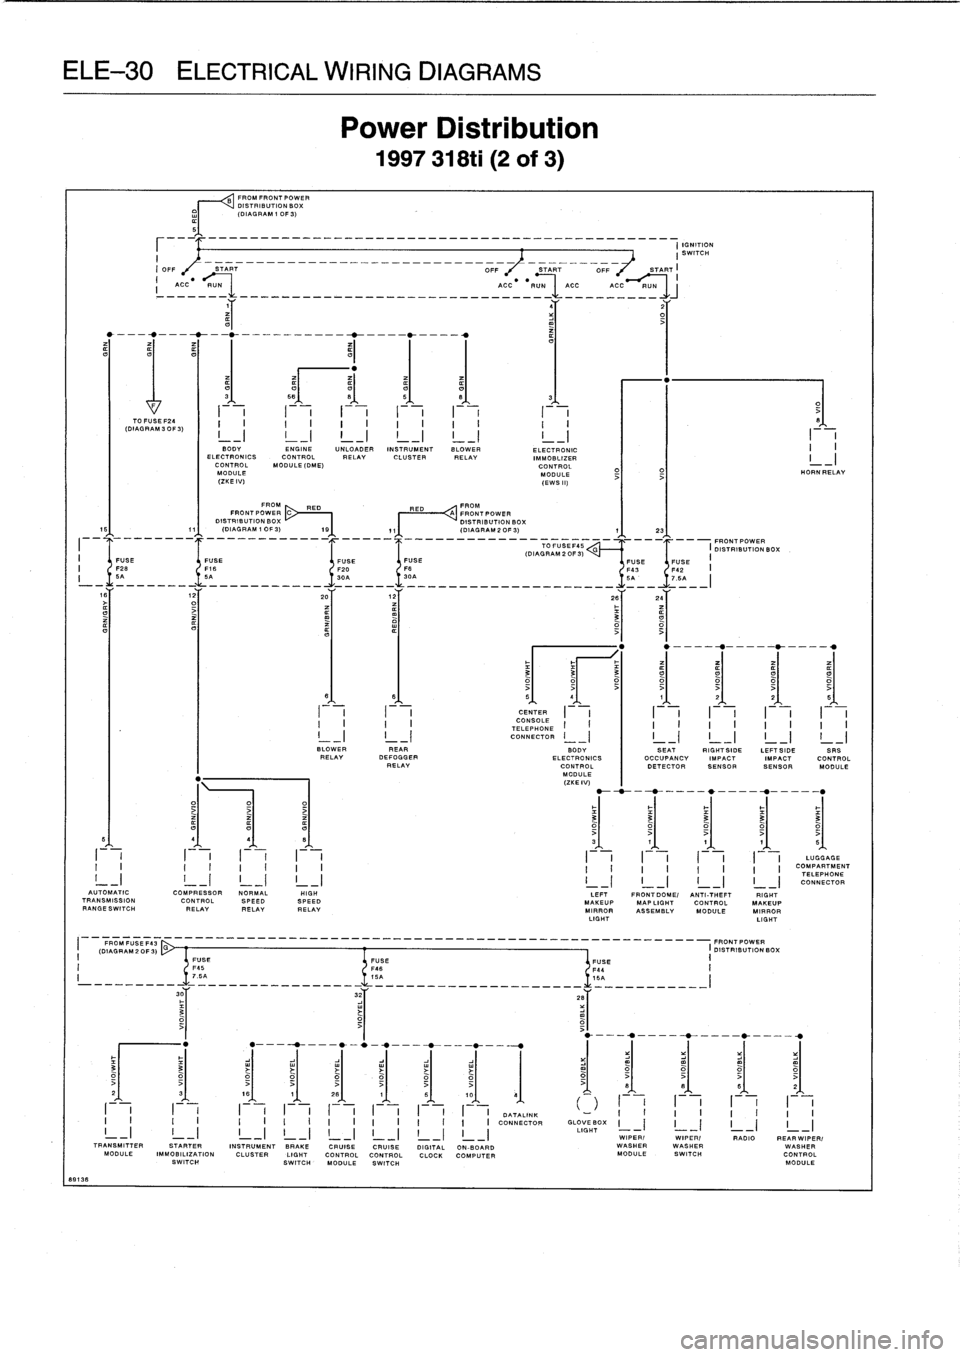 BMW M3 1993 E36 Owners Manual 
ELE-30
ELECTRICAL
WIRING
DIAGRAMS

I
ACC
-R=_
____-____-______________
ACC
-
RUN

	

ACC
-_-C~

4Y

	

2Y

I

	

I

TO
FUSE
F24
(DIAGRAM
30F
3)

FROM
FRONT
POWER
DISTRIBUTION
BOX
(DIAGRAM
1
0F3)
IGNI